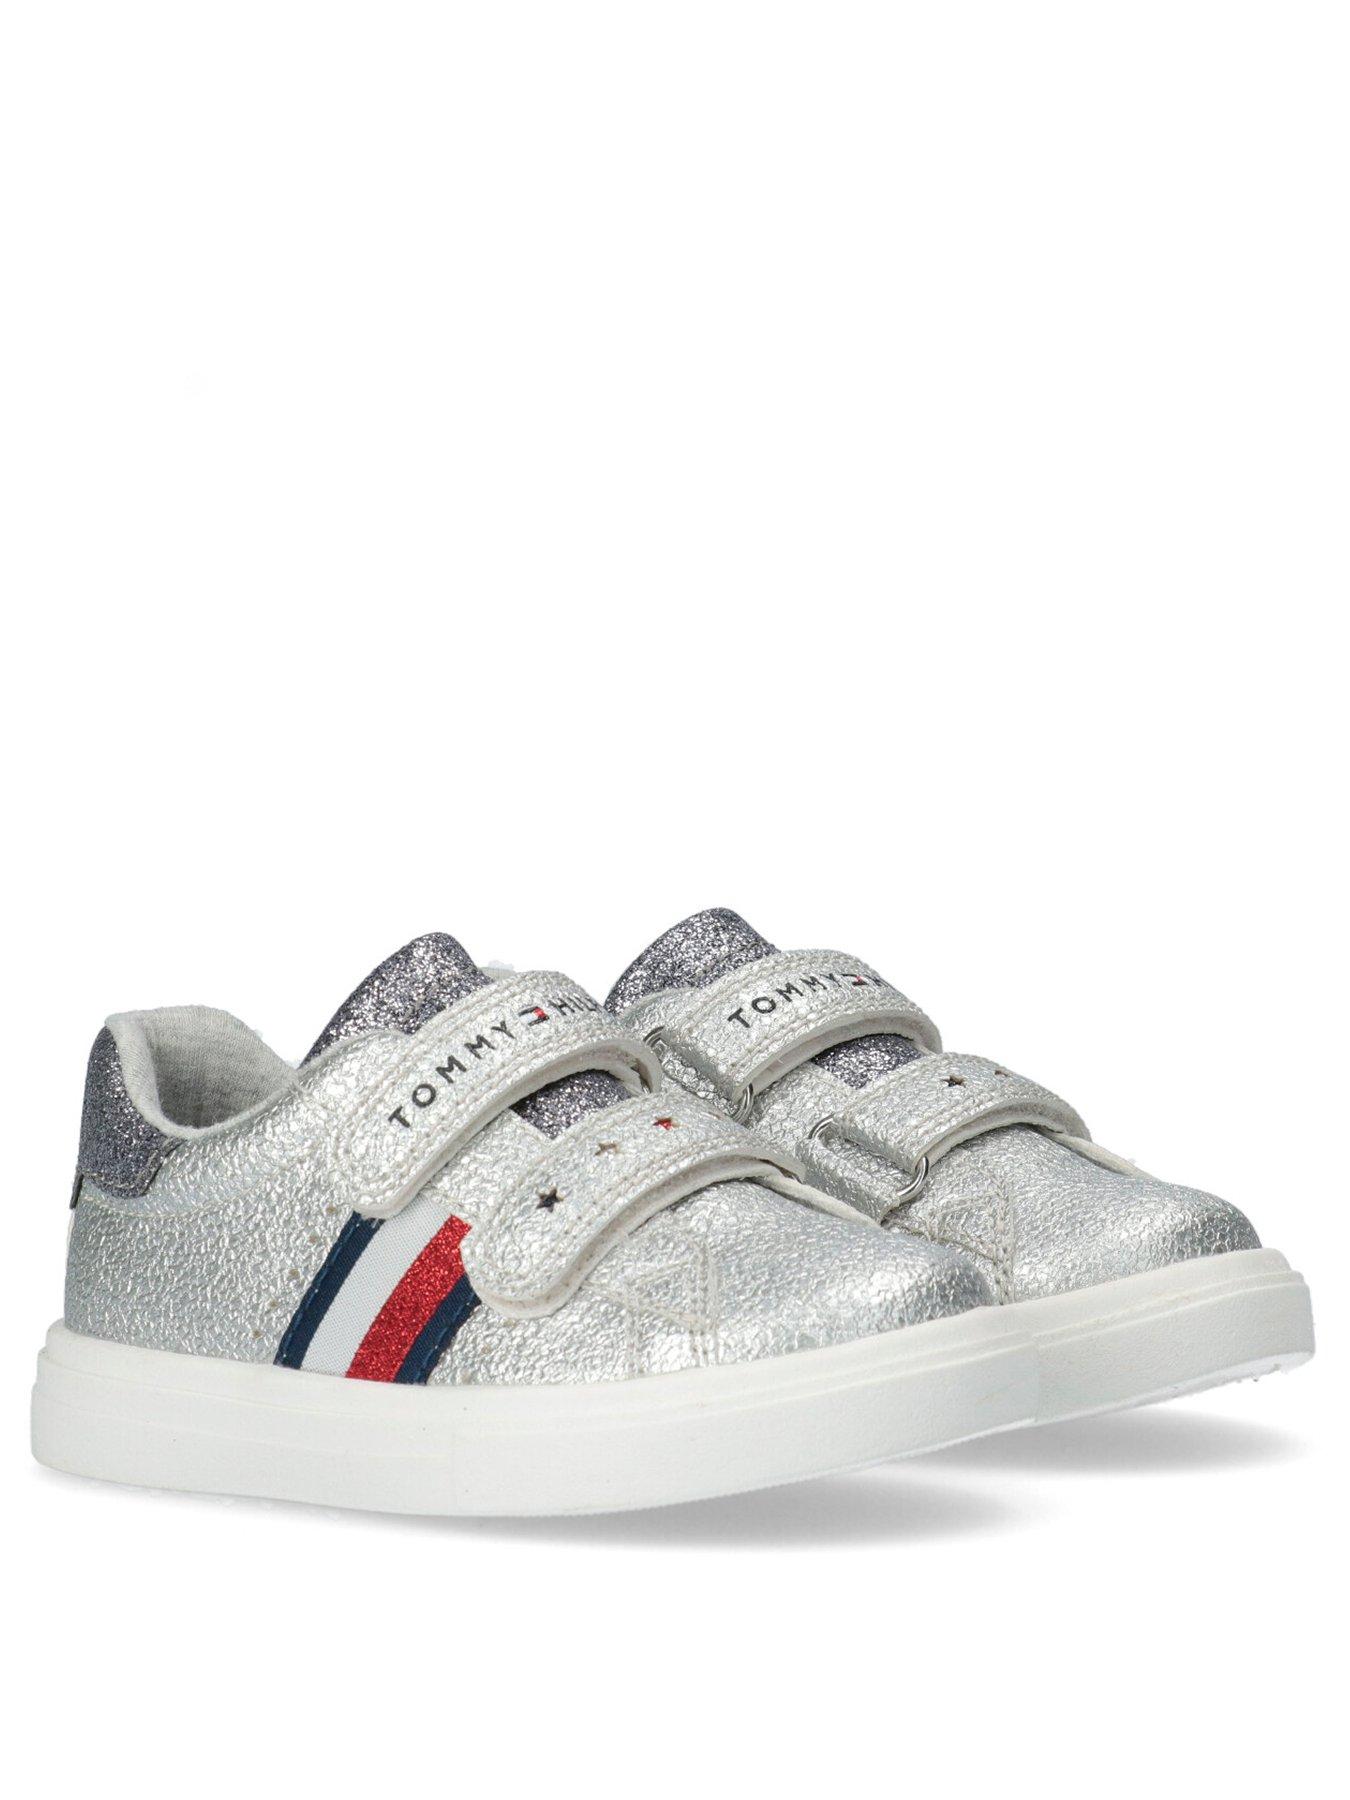 tommy hilfiger trainers size 3